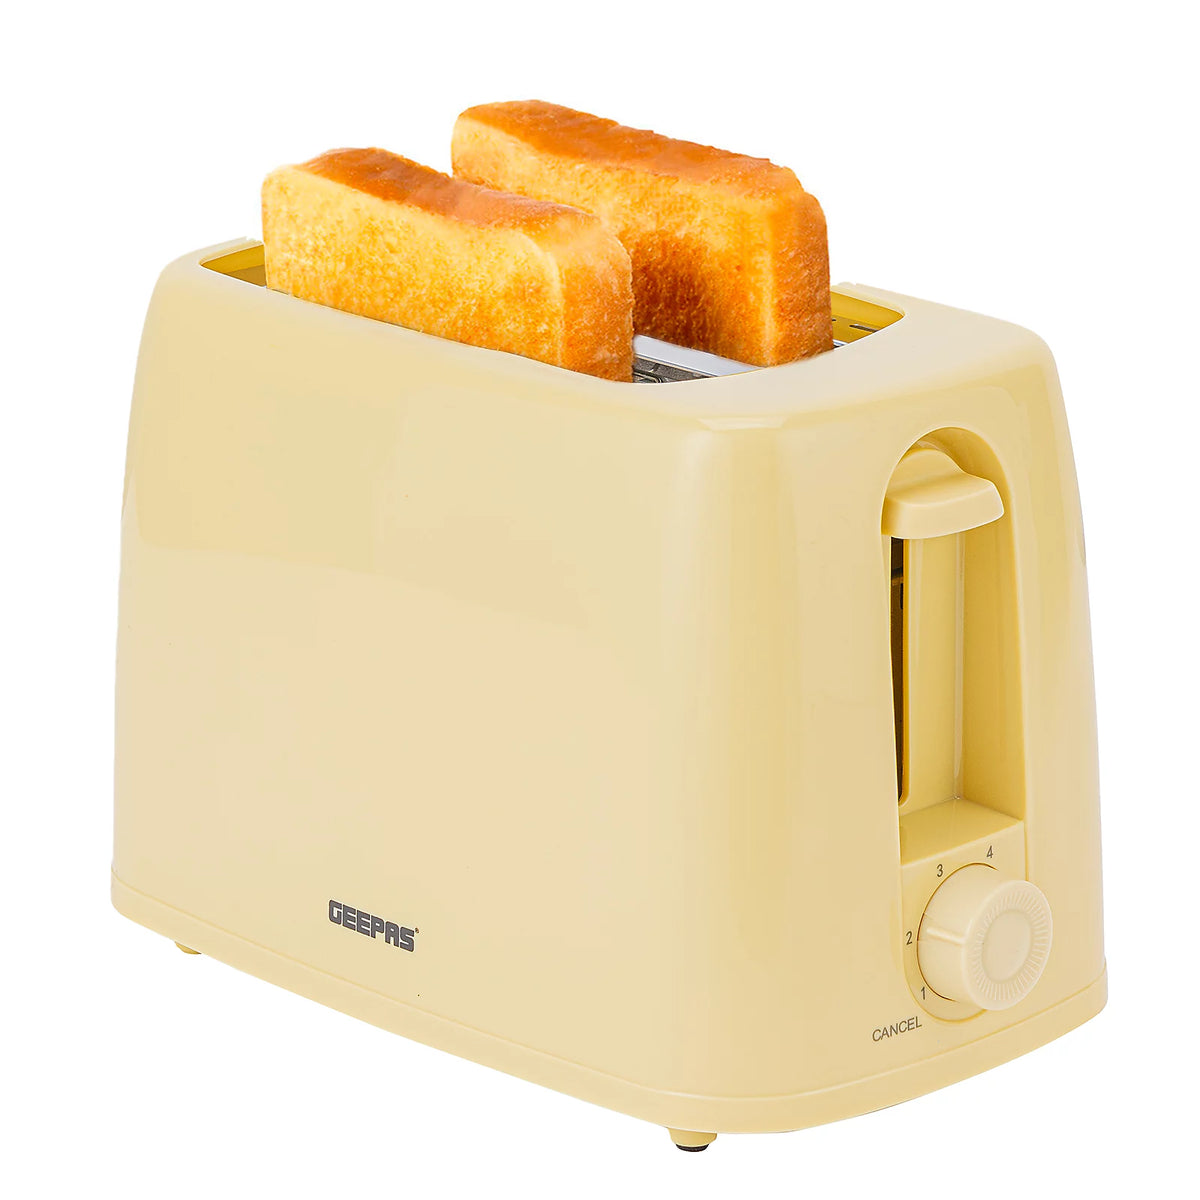 2 Slice Bread Toaster 6 Level Browning Control with Crumb Tray